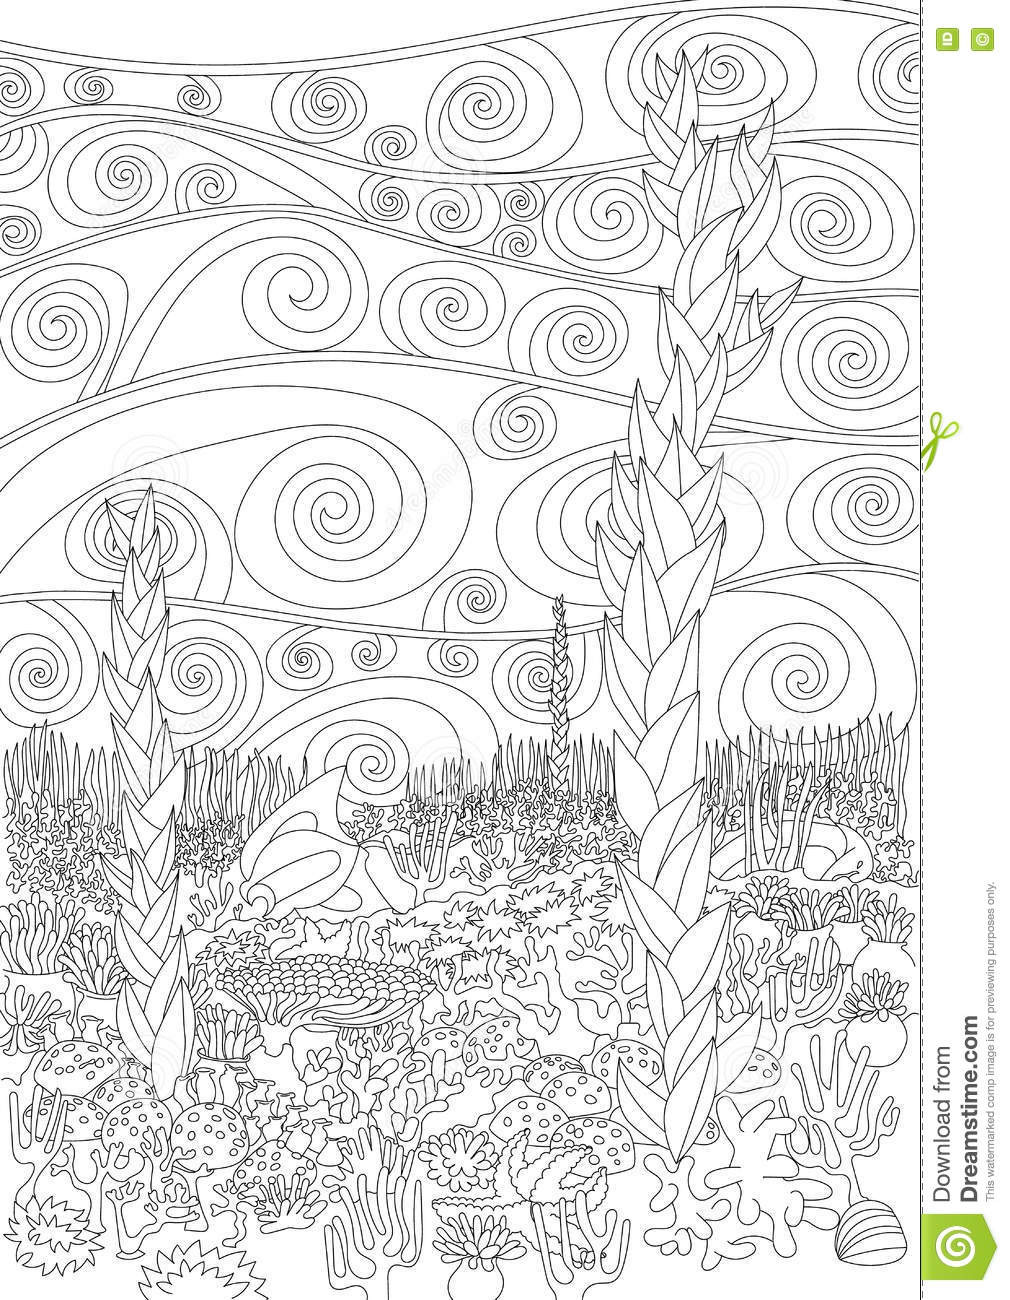 Color Therapy An Anti Stress Coloring Book
 Art And Color Therapy Anti Stress Adult Coloring Book